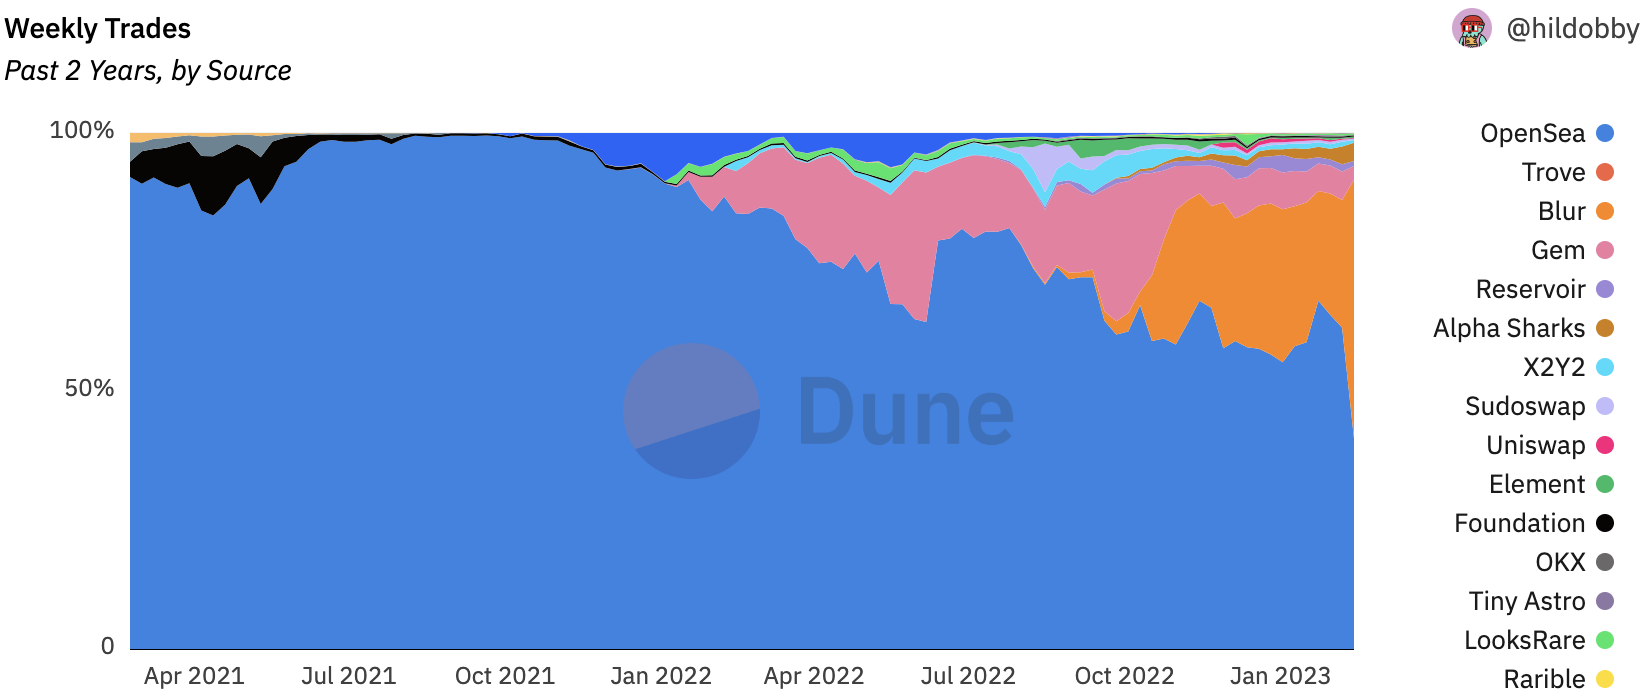 Weekly NFT trading volume over past 2 years by marketplace (source https://dune.com/hildobby/NFTs)